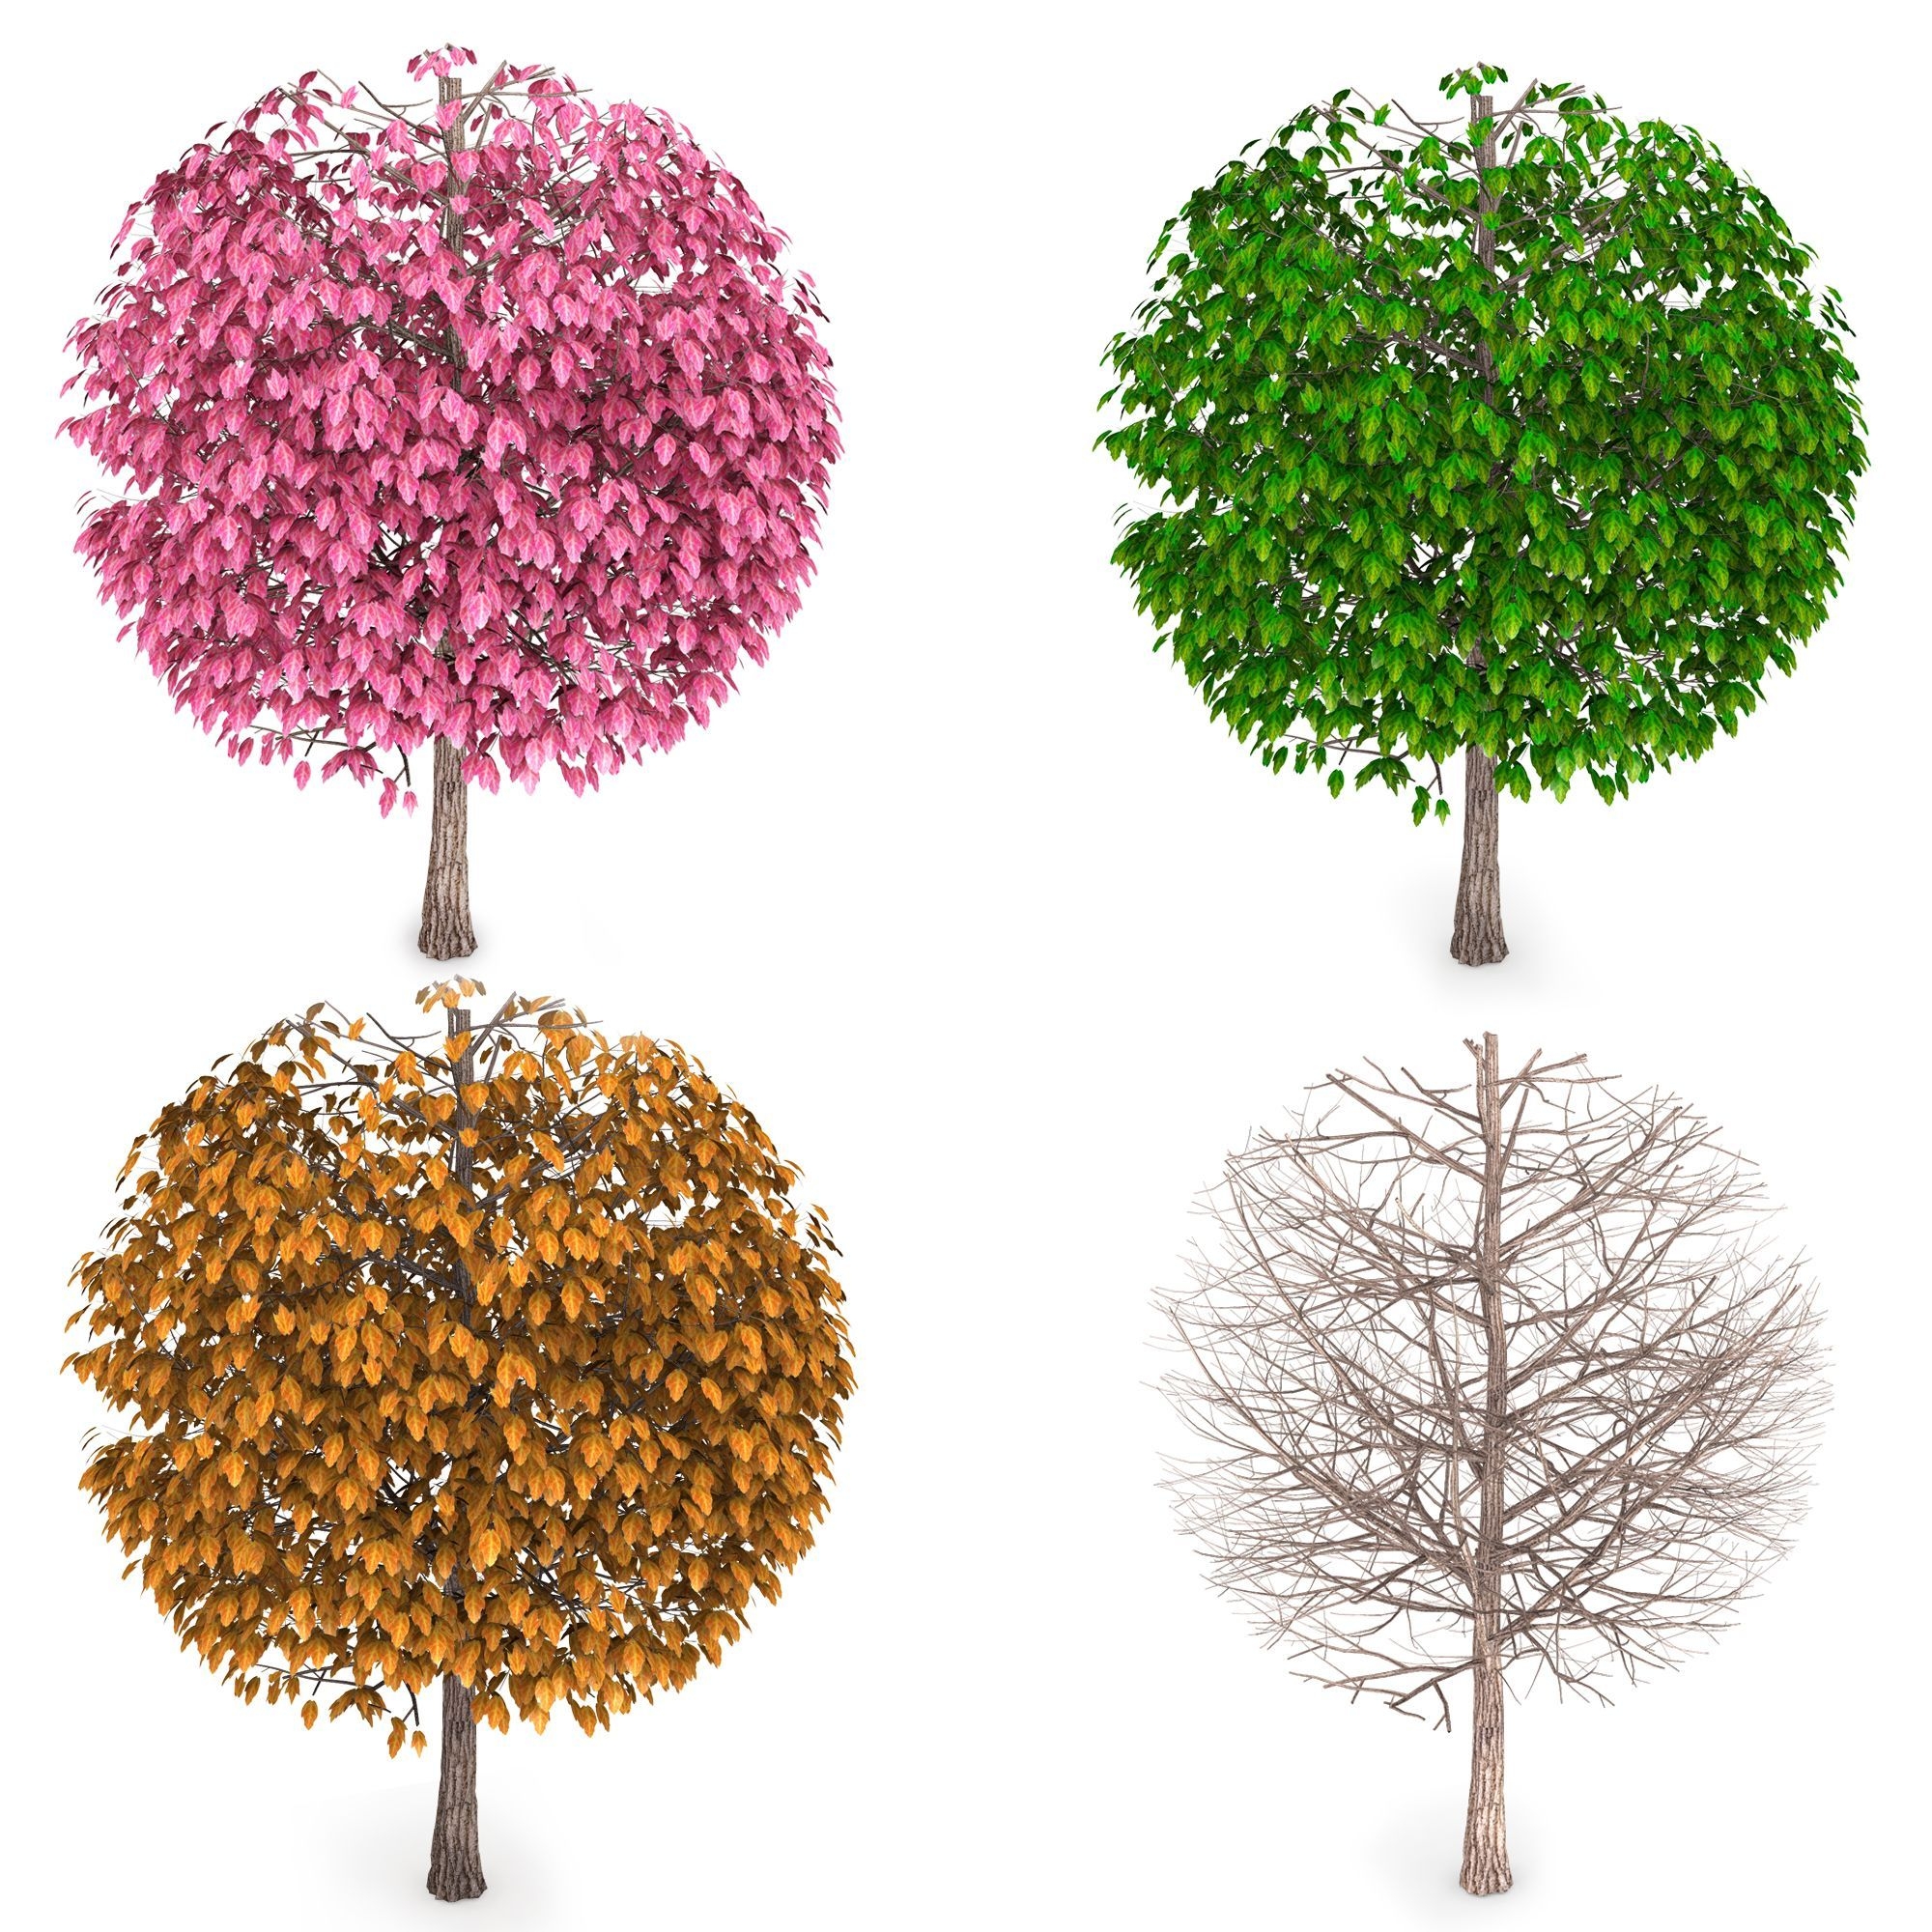 trees with four seasons stock photo | powerpoint slide